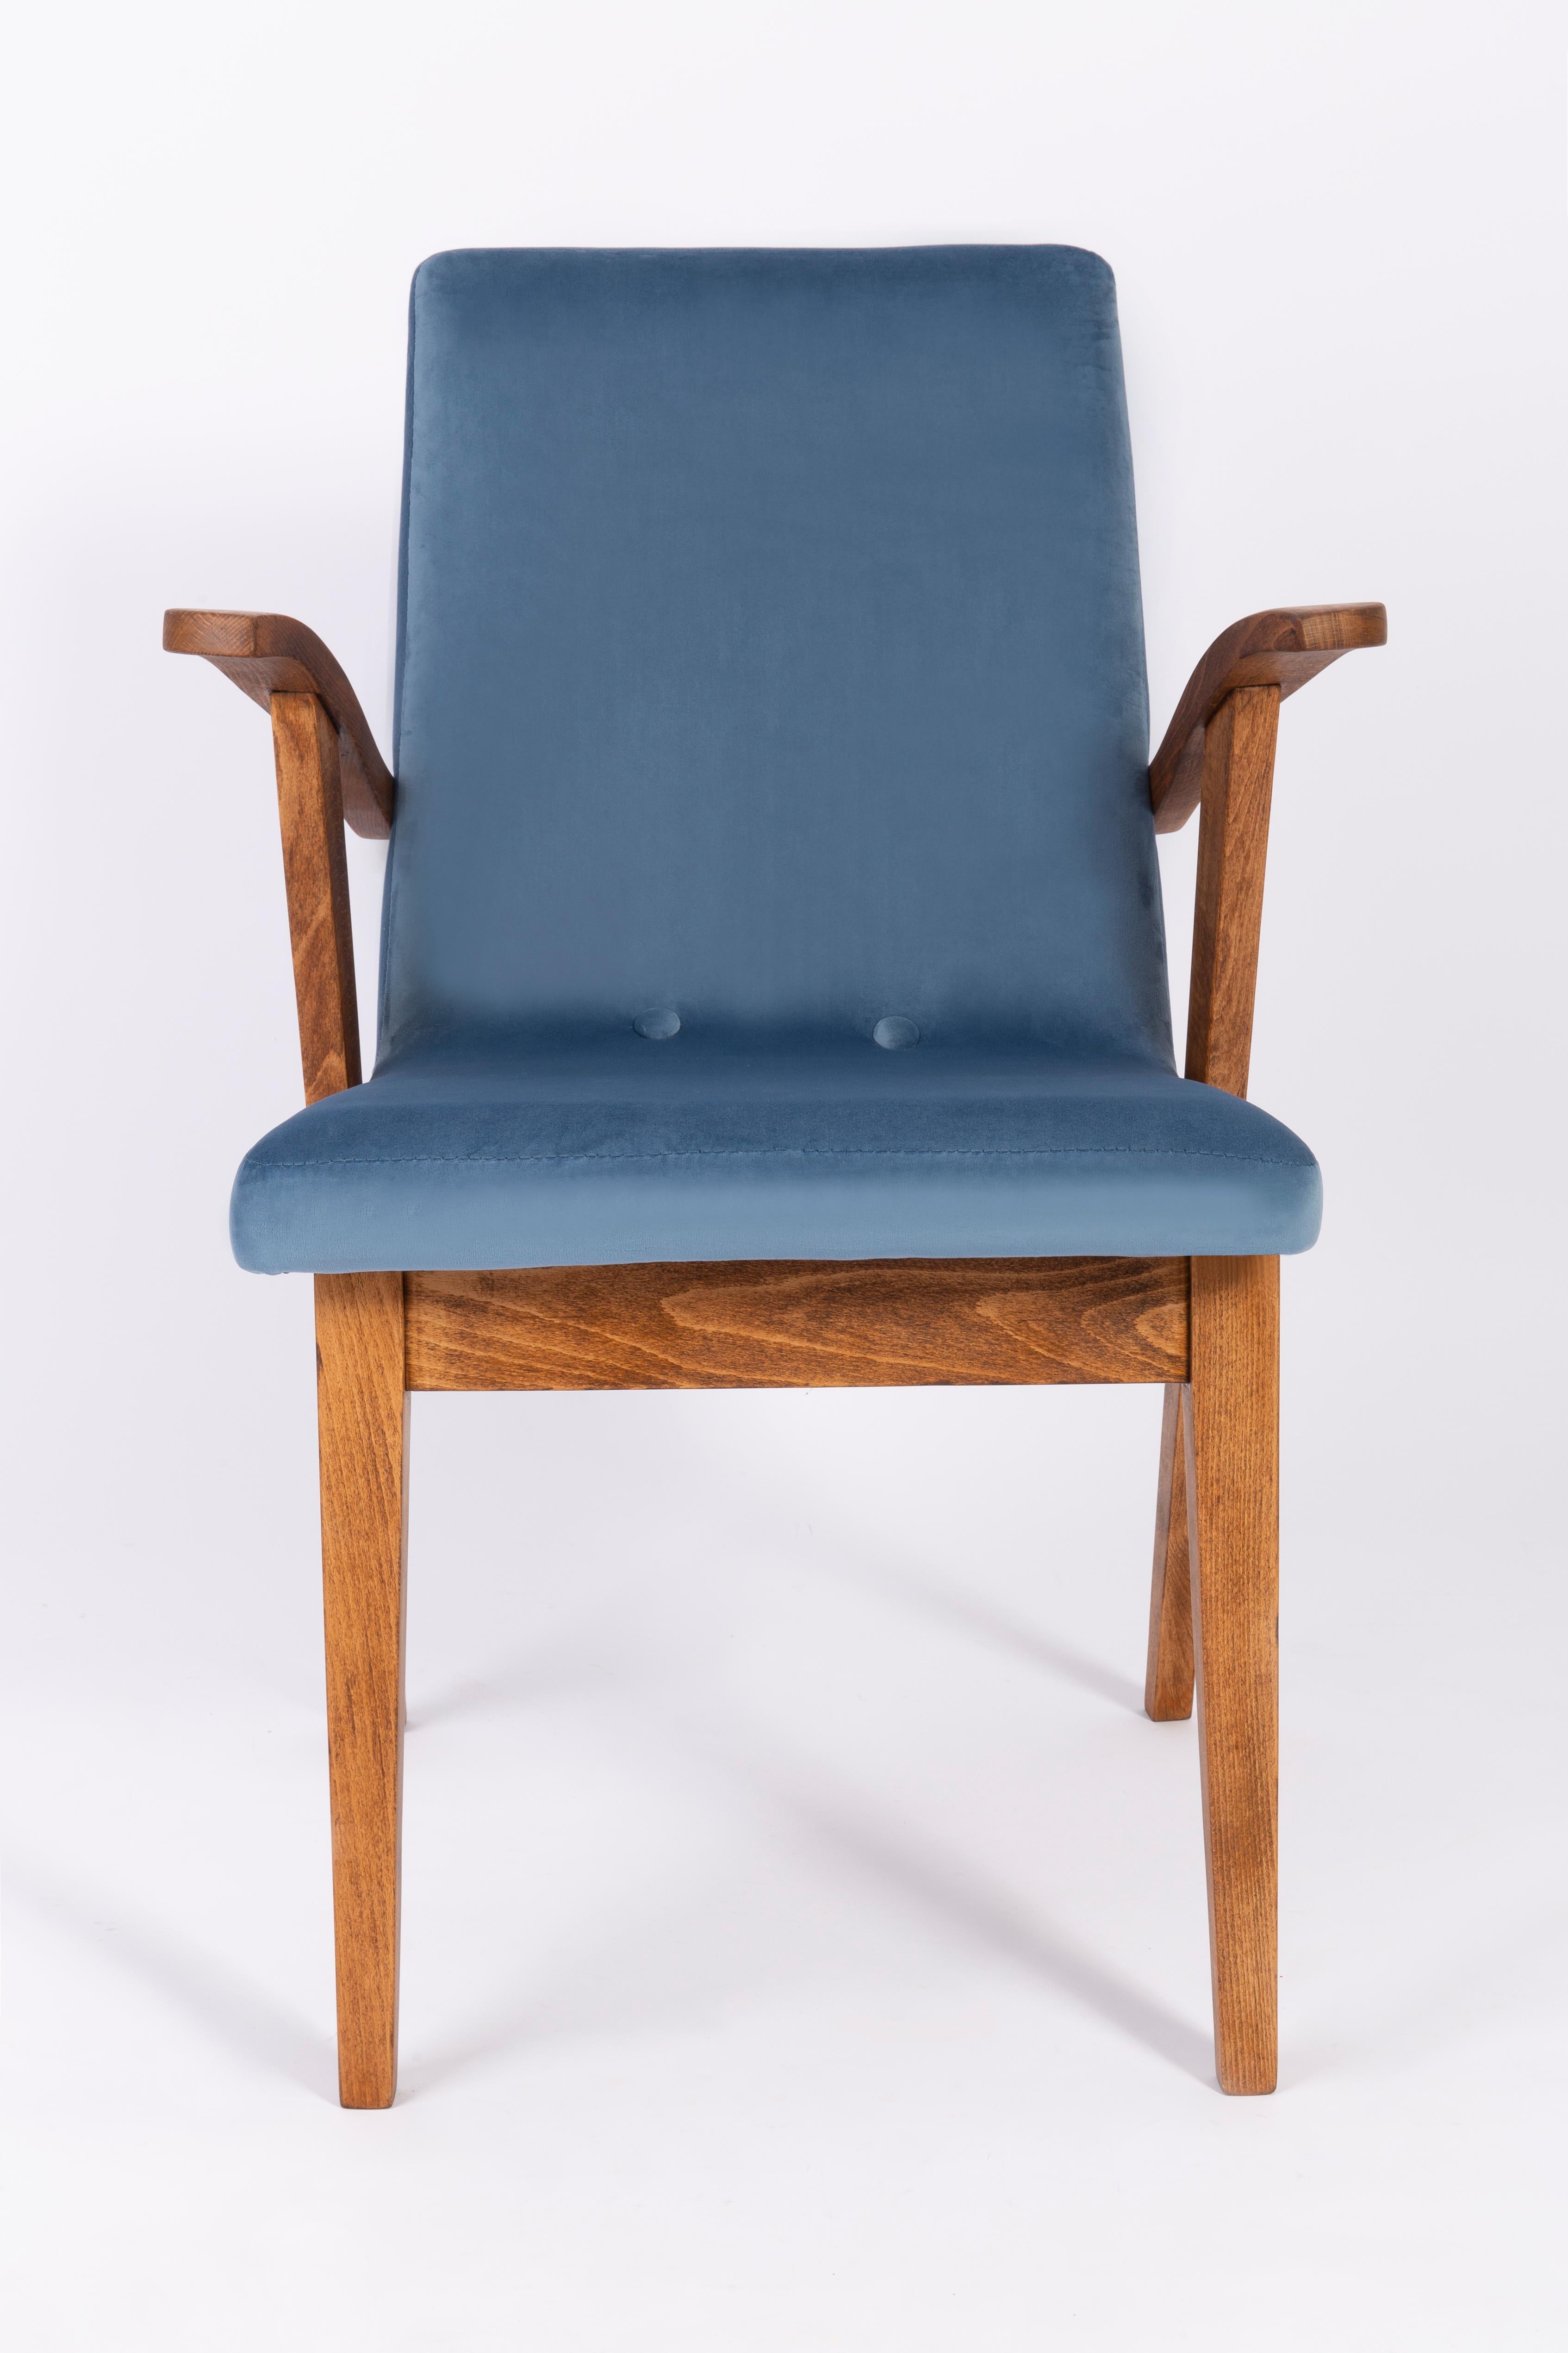 Polish Set of Six 20th Century Vintage Blue Chairs by Mieczyslaw Puchala, 1960s For Sale